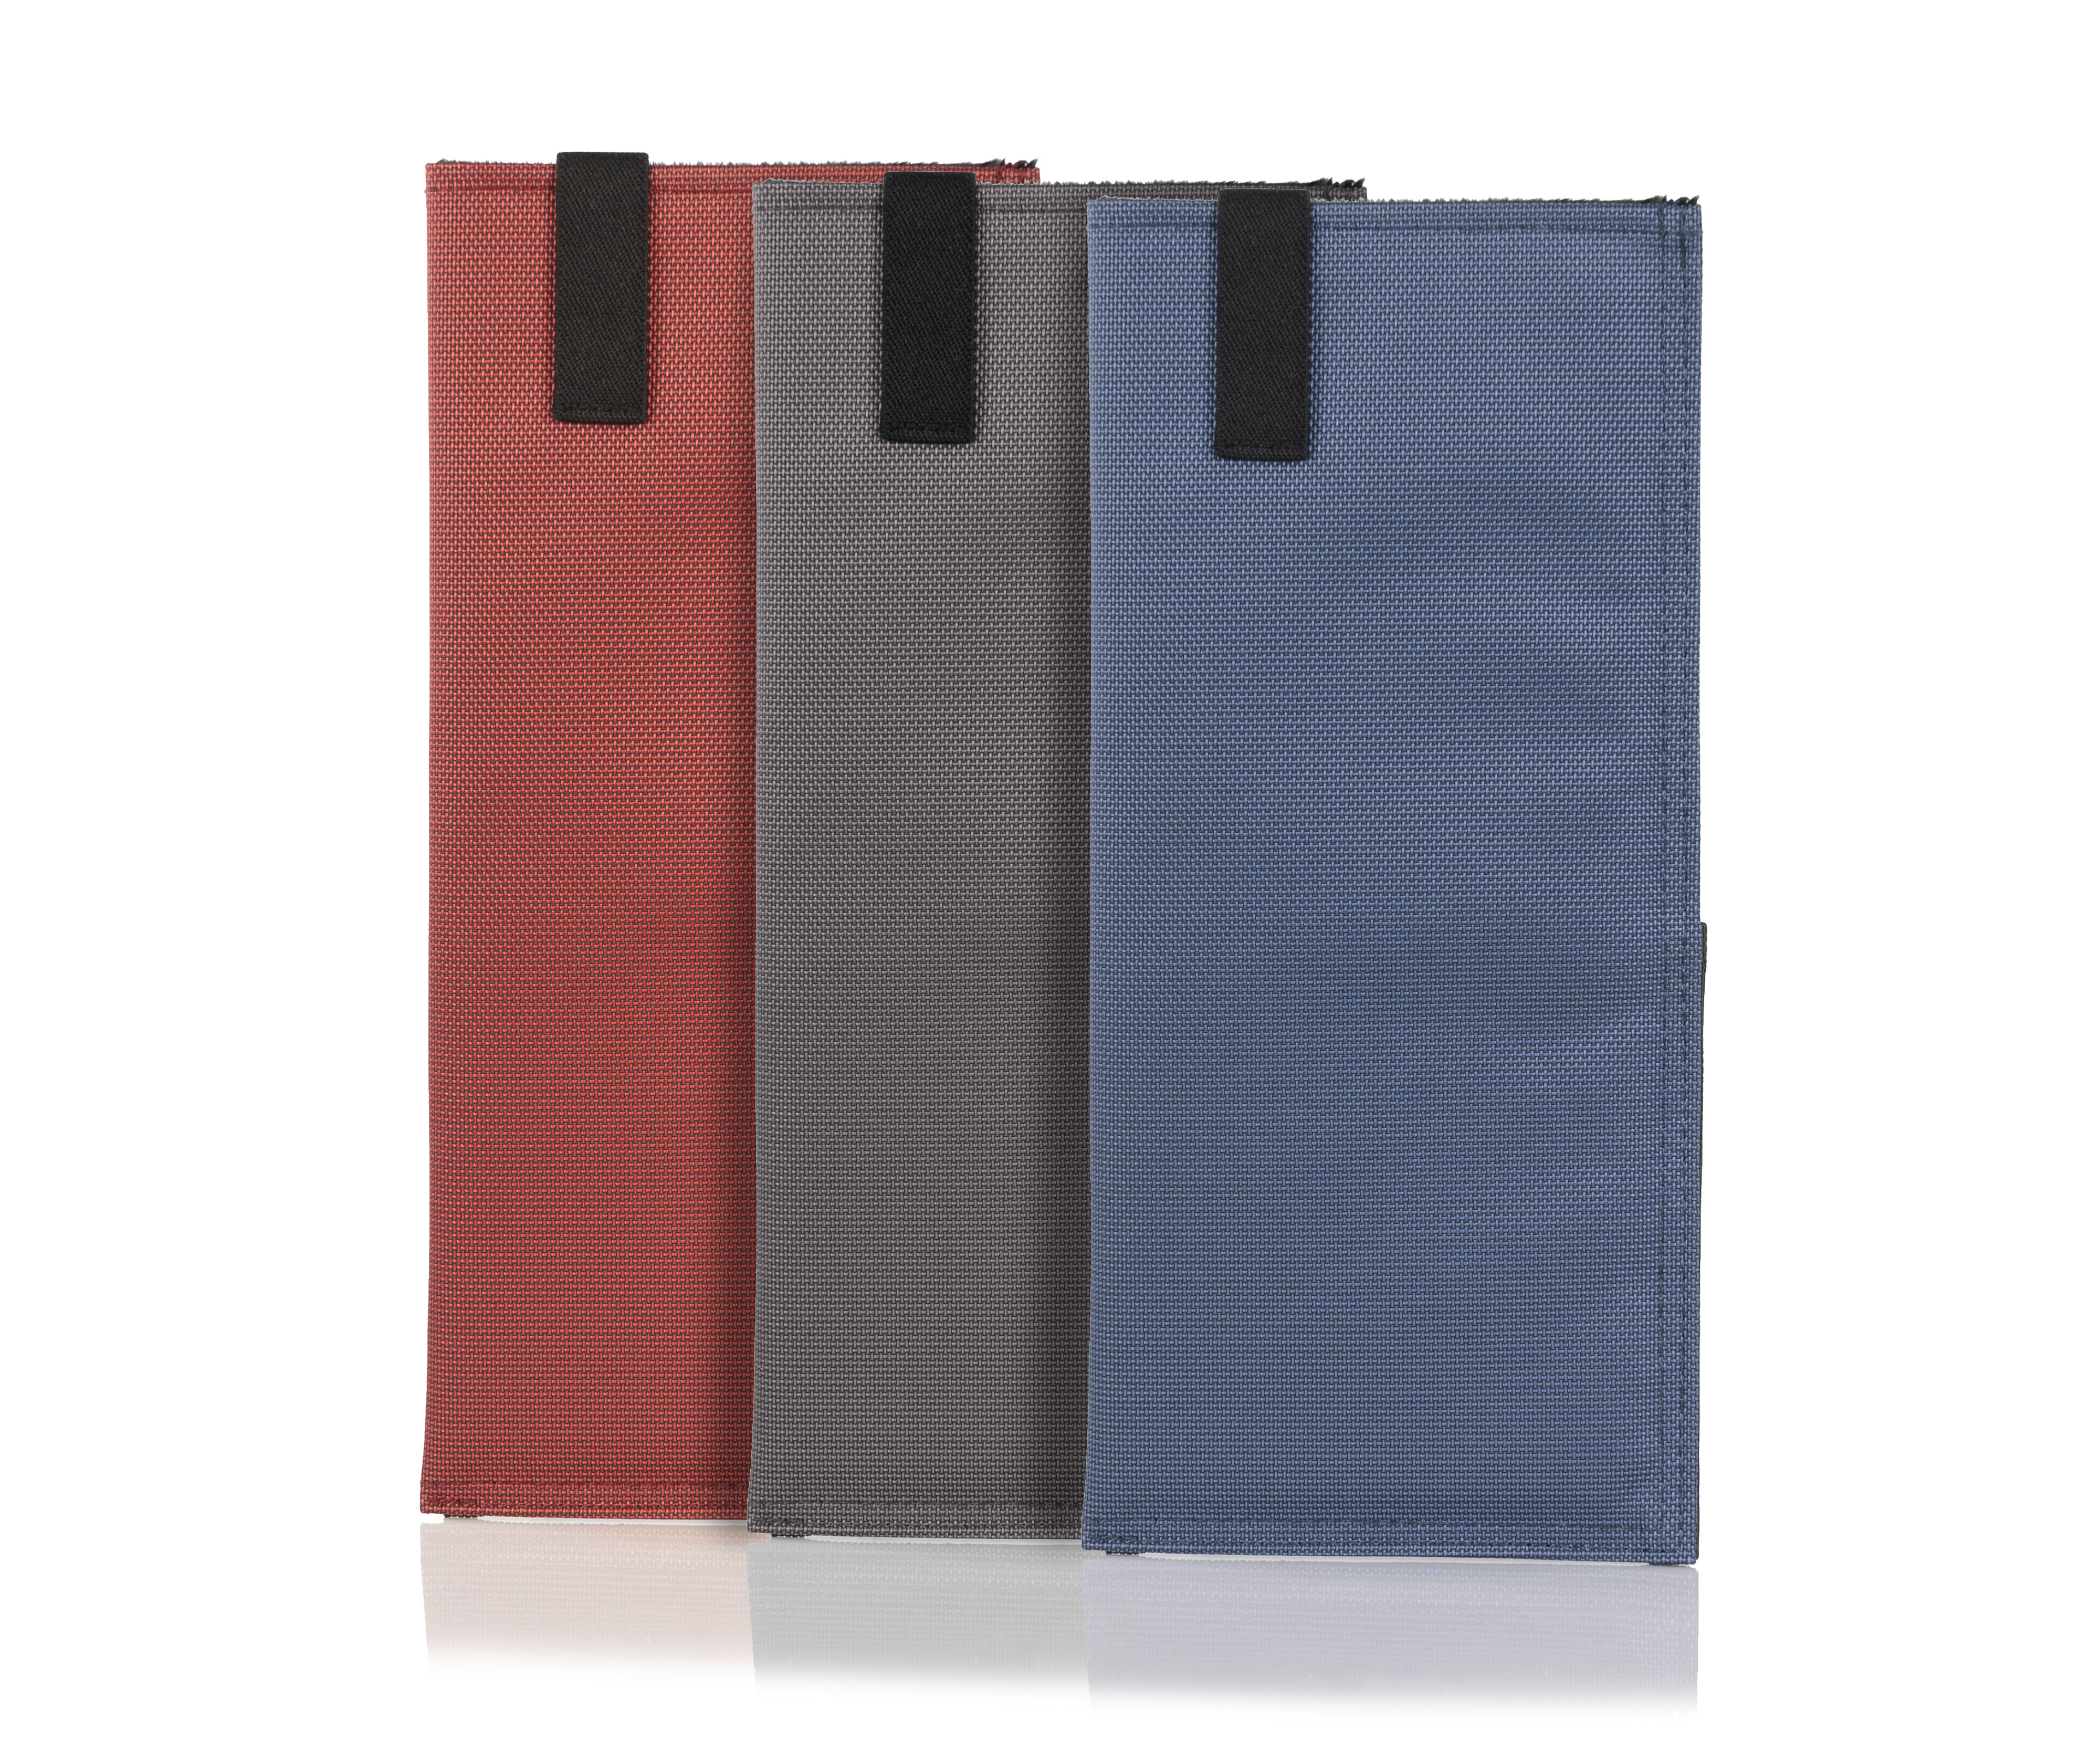 Three Forza fabric color options - red, coffee, and blue